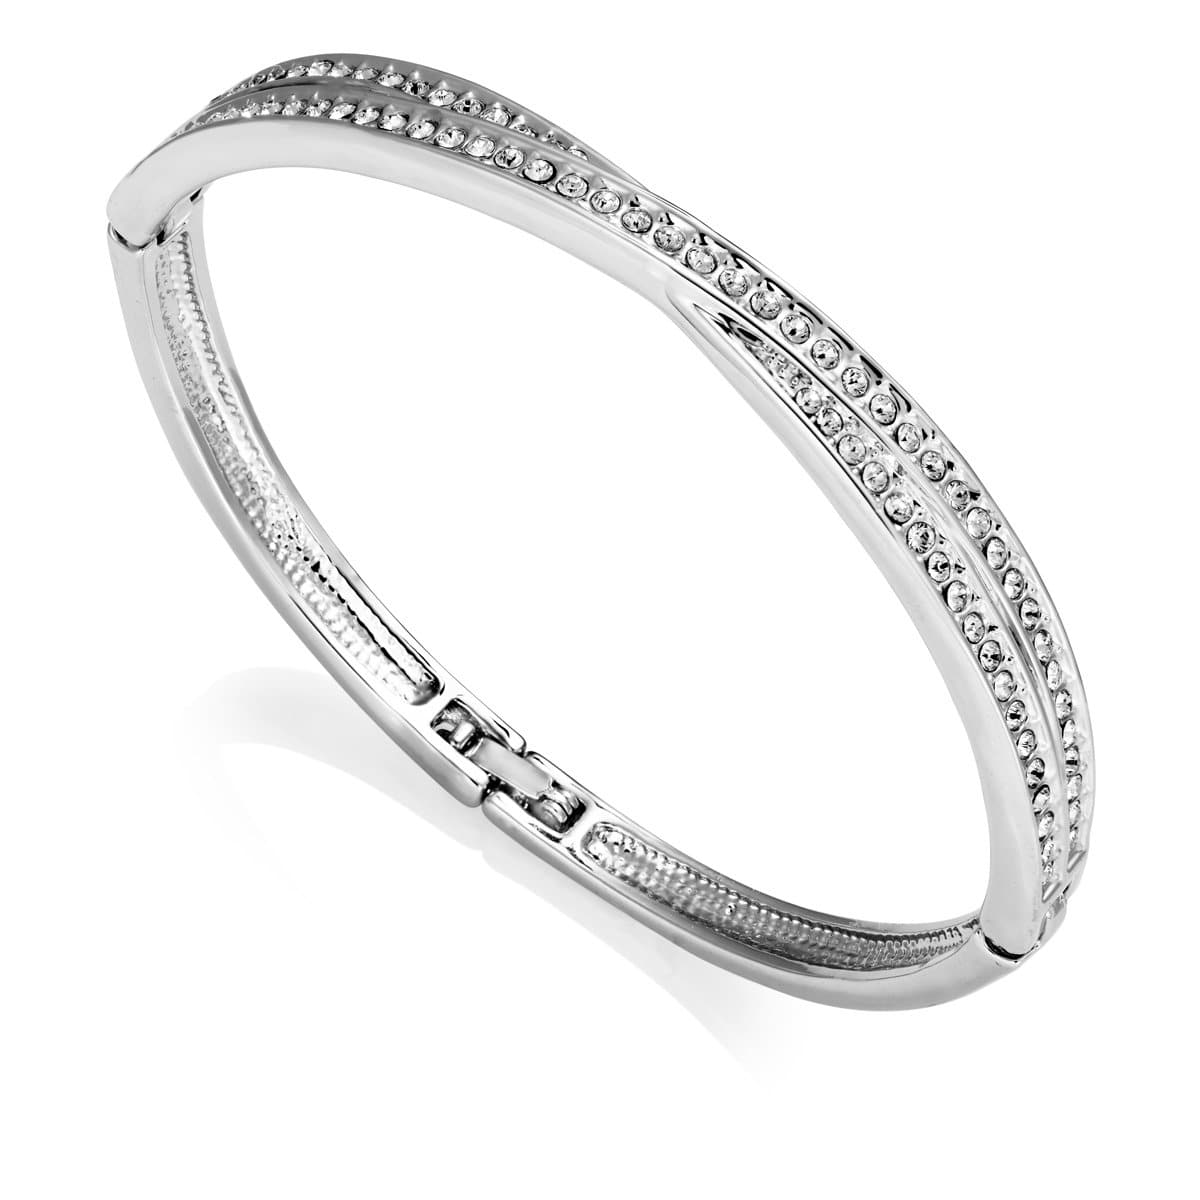 Silver Plated Crossover Bangle Created with Zircondia® Crystals by Philip Jones Jewellery